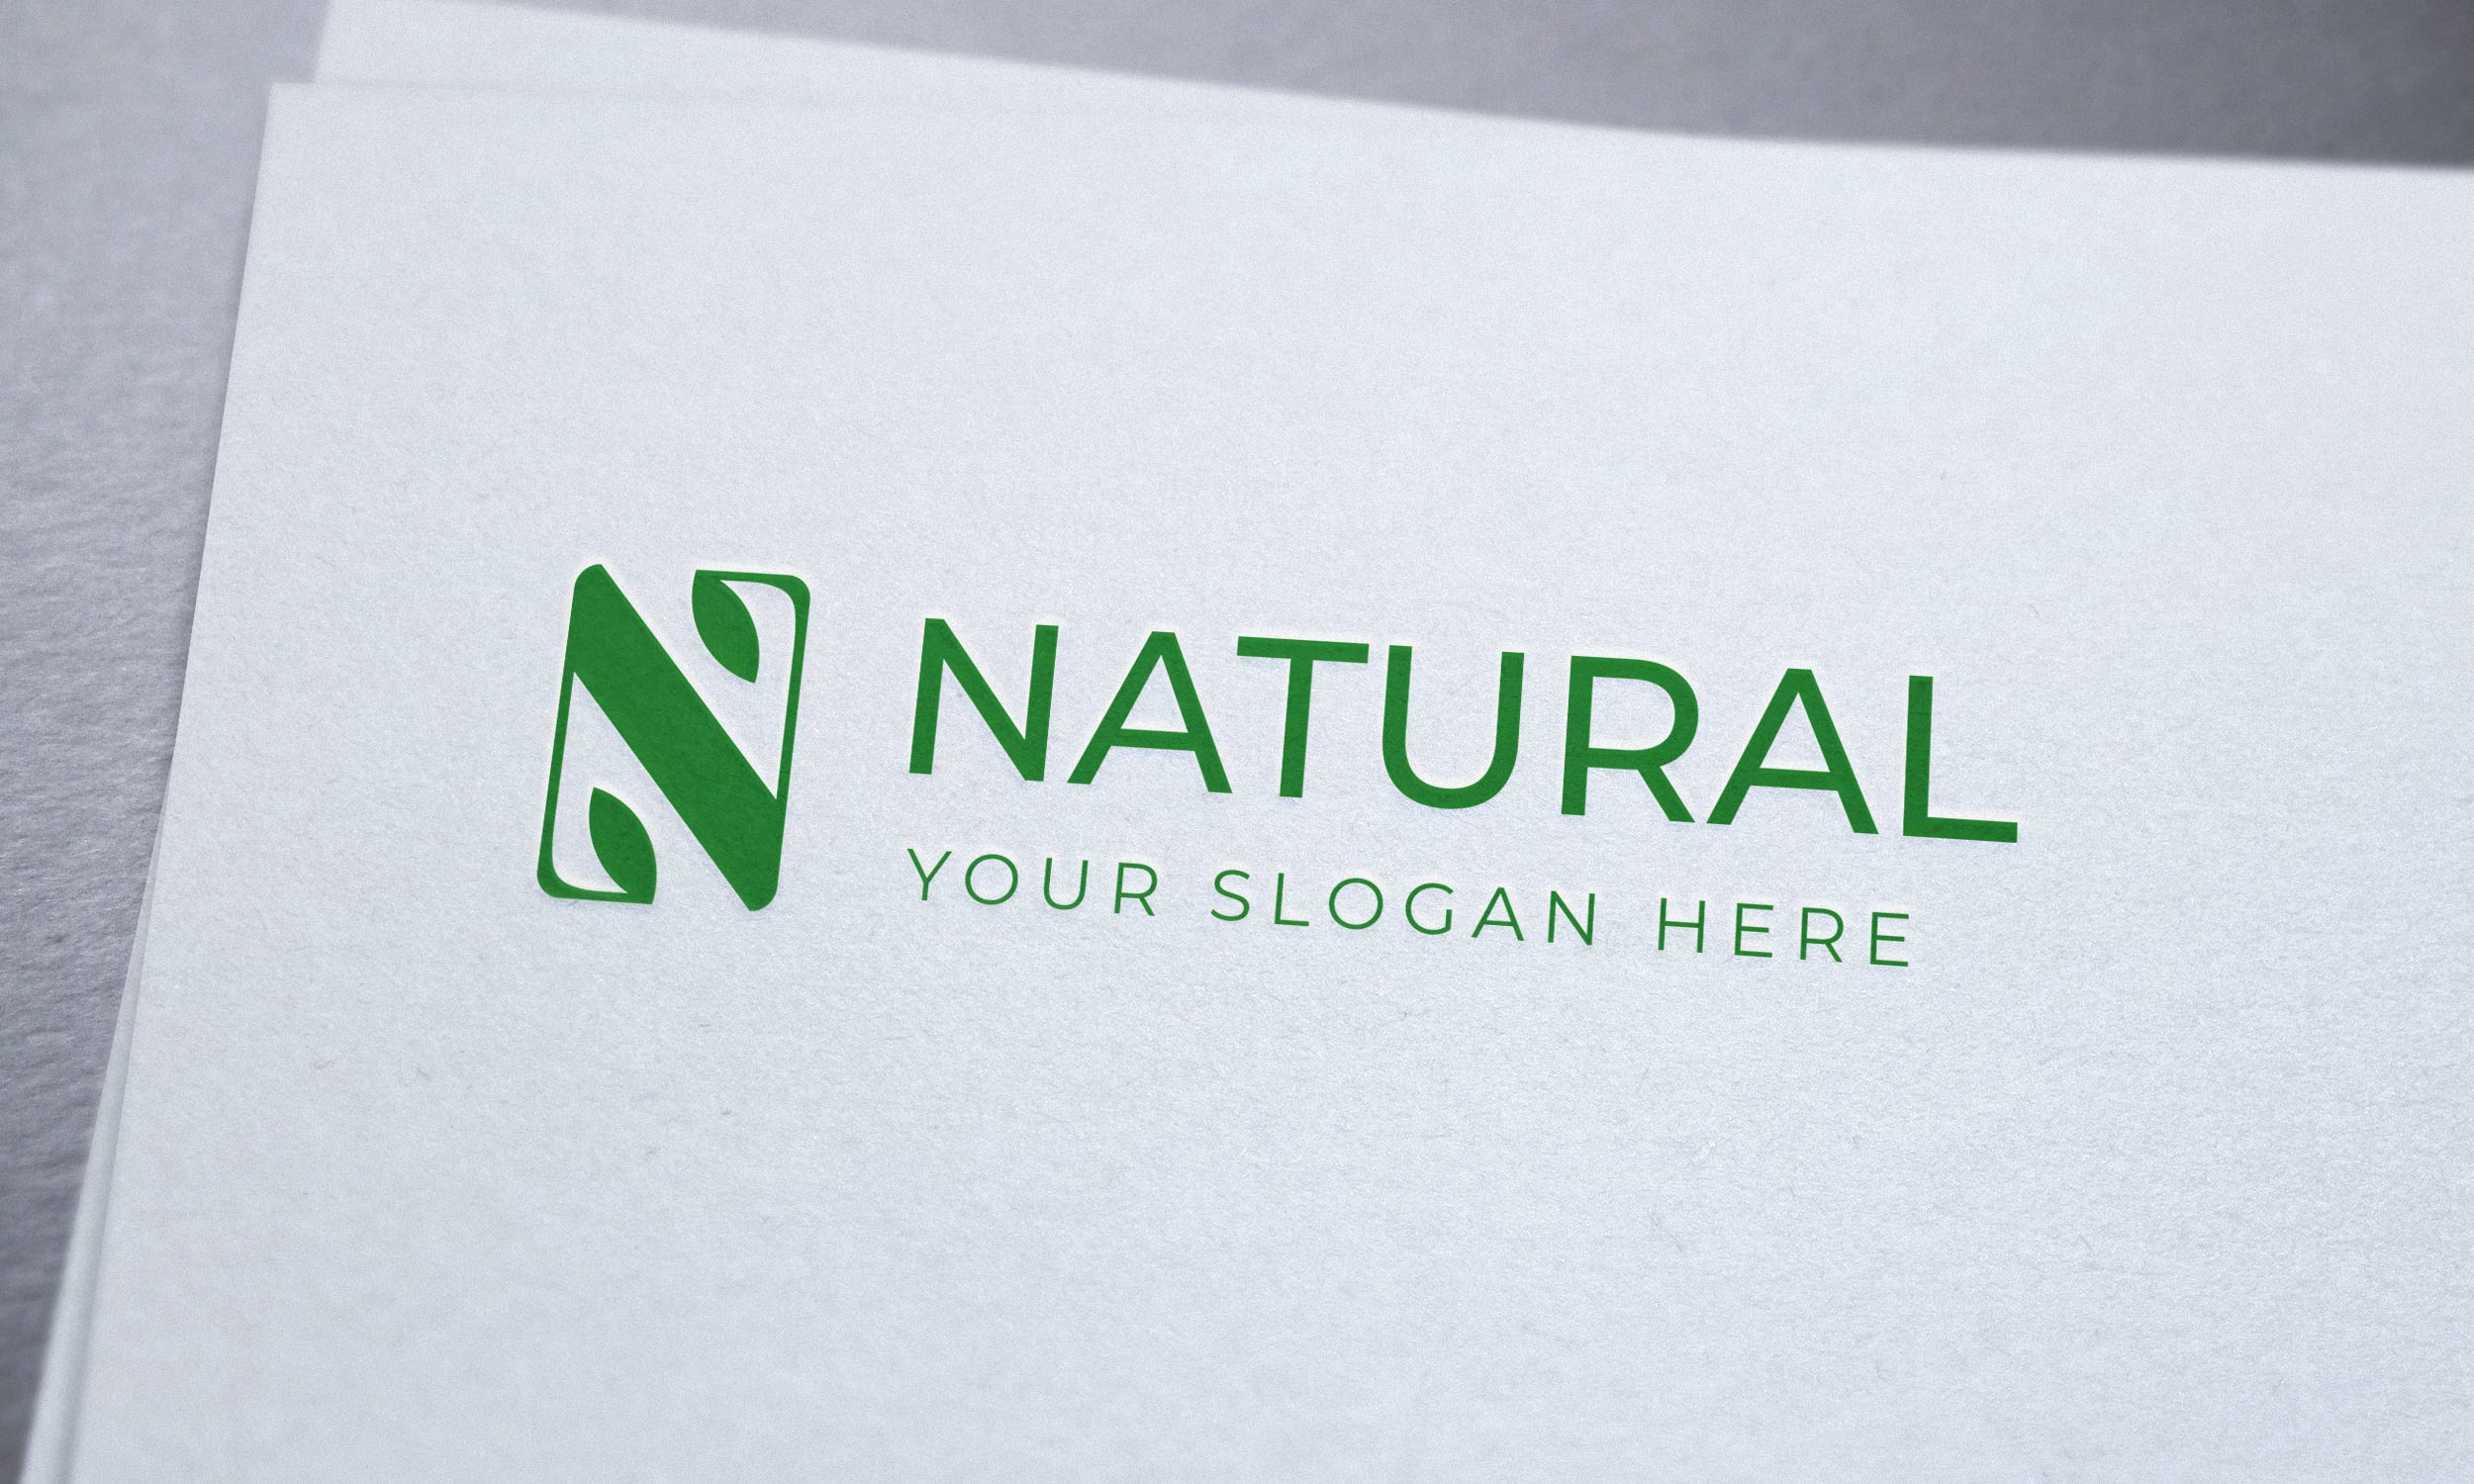 Green eco logo on a light paper.